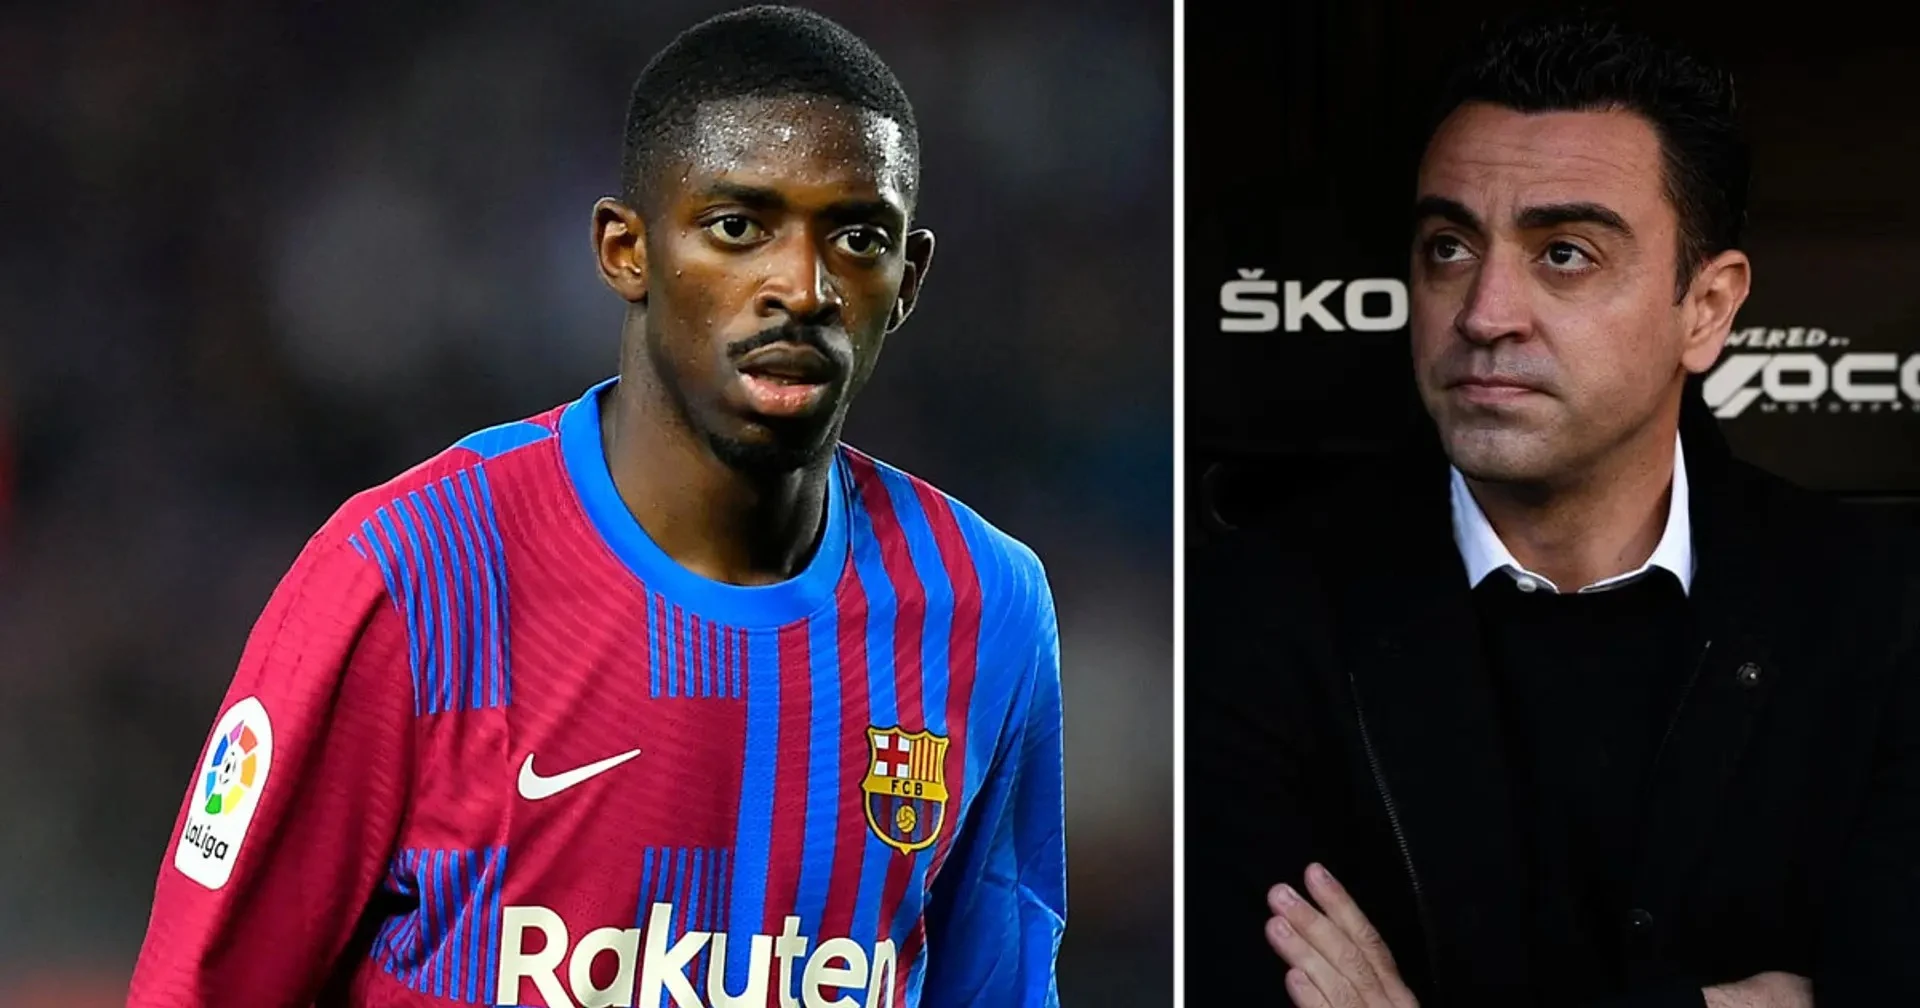 2 key reasons why Dembele wants to continue at Barca revealed